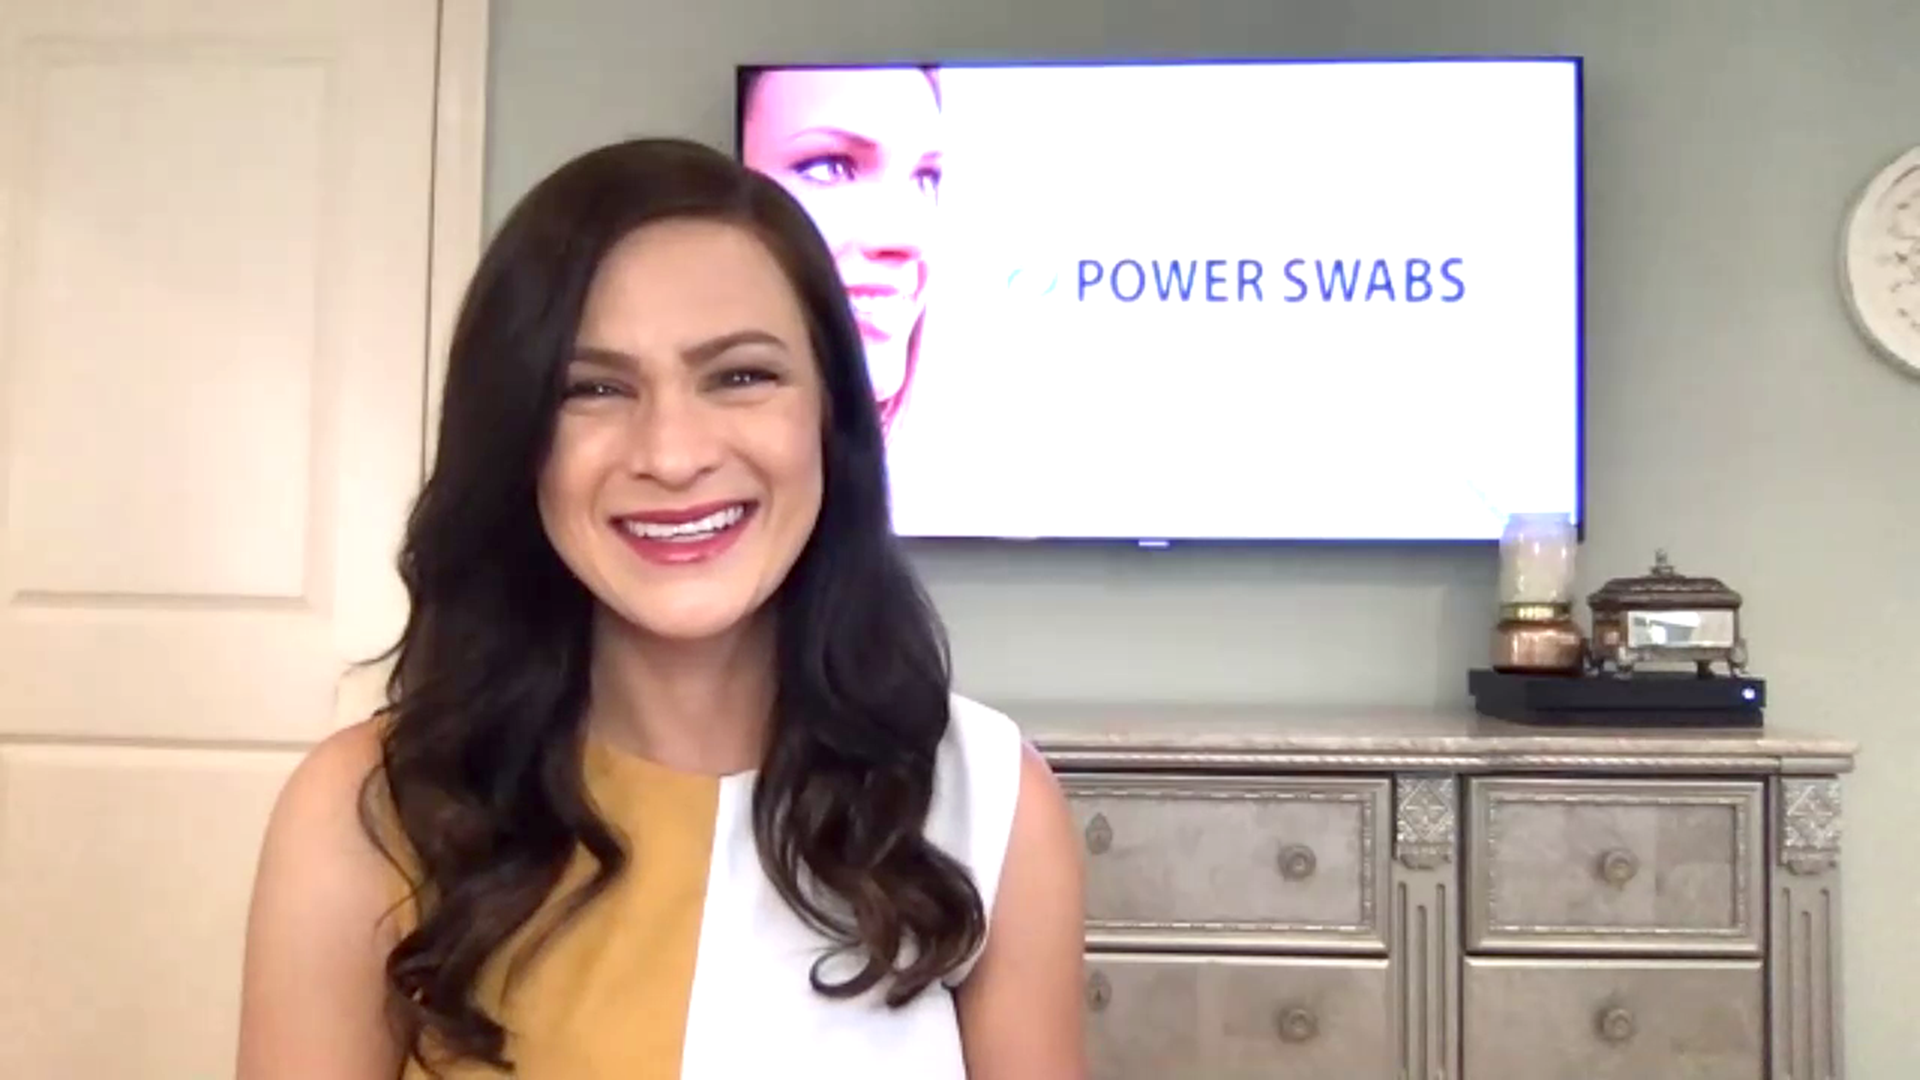 Stephanie Jacolie demonstrates the Power Swabs teeth whitening system.  Sponsored by Power Swabs.